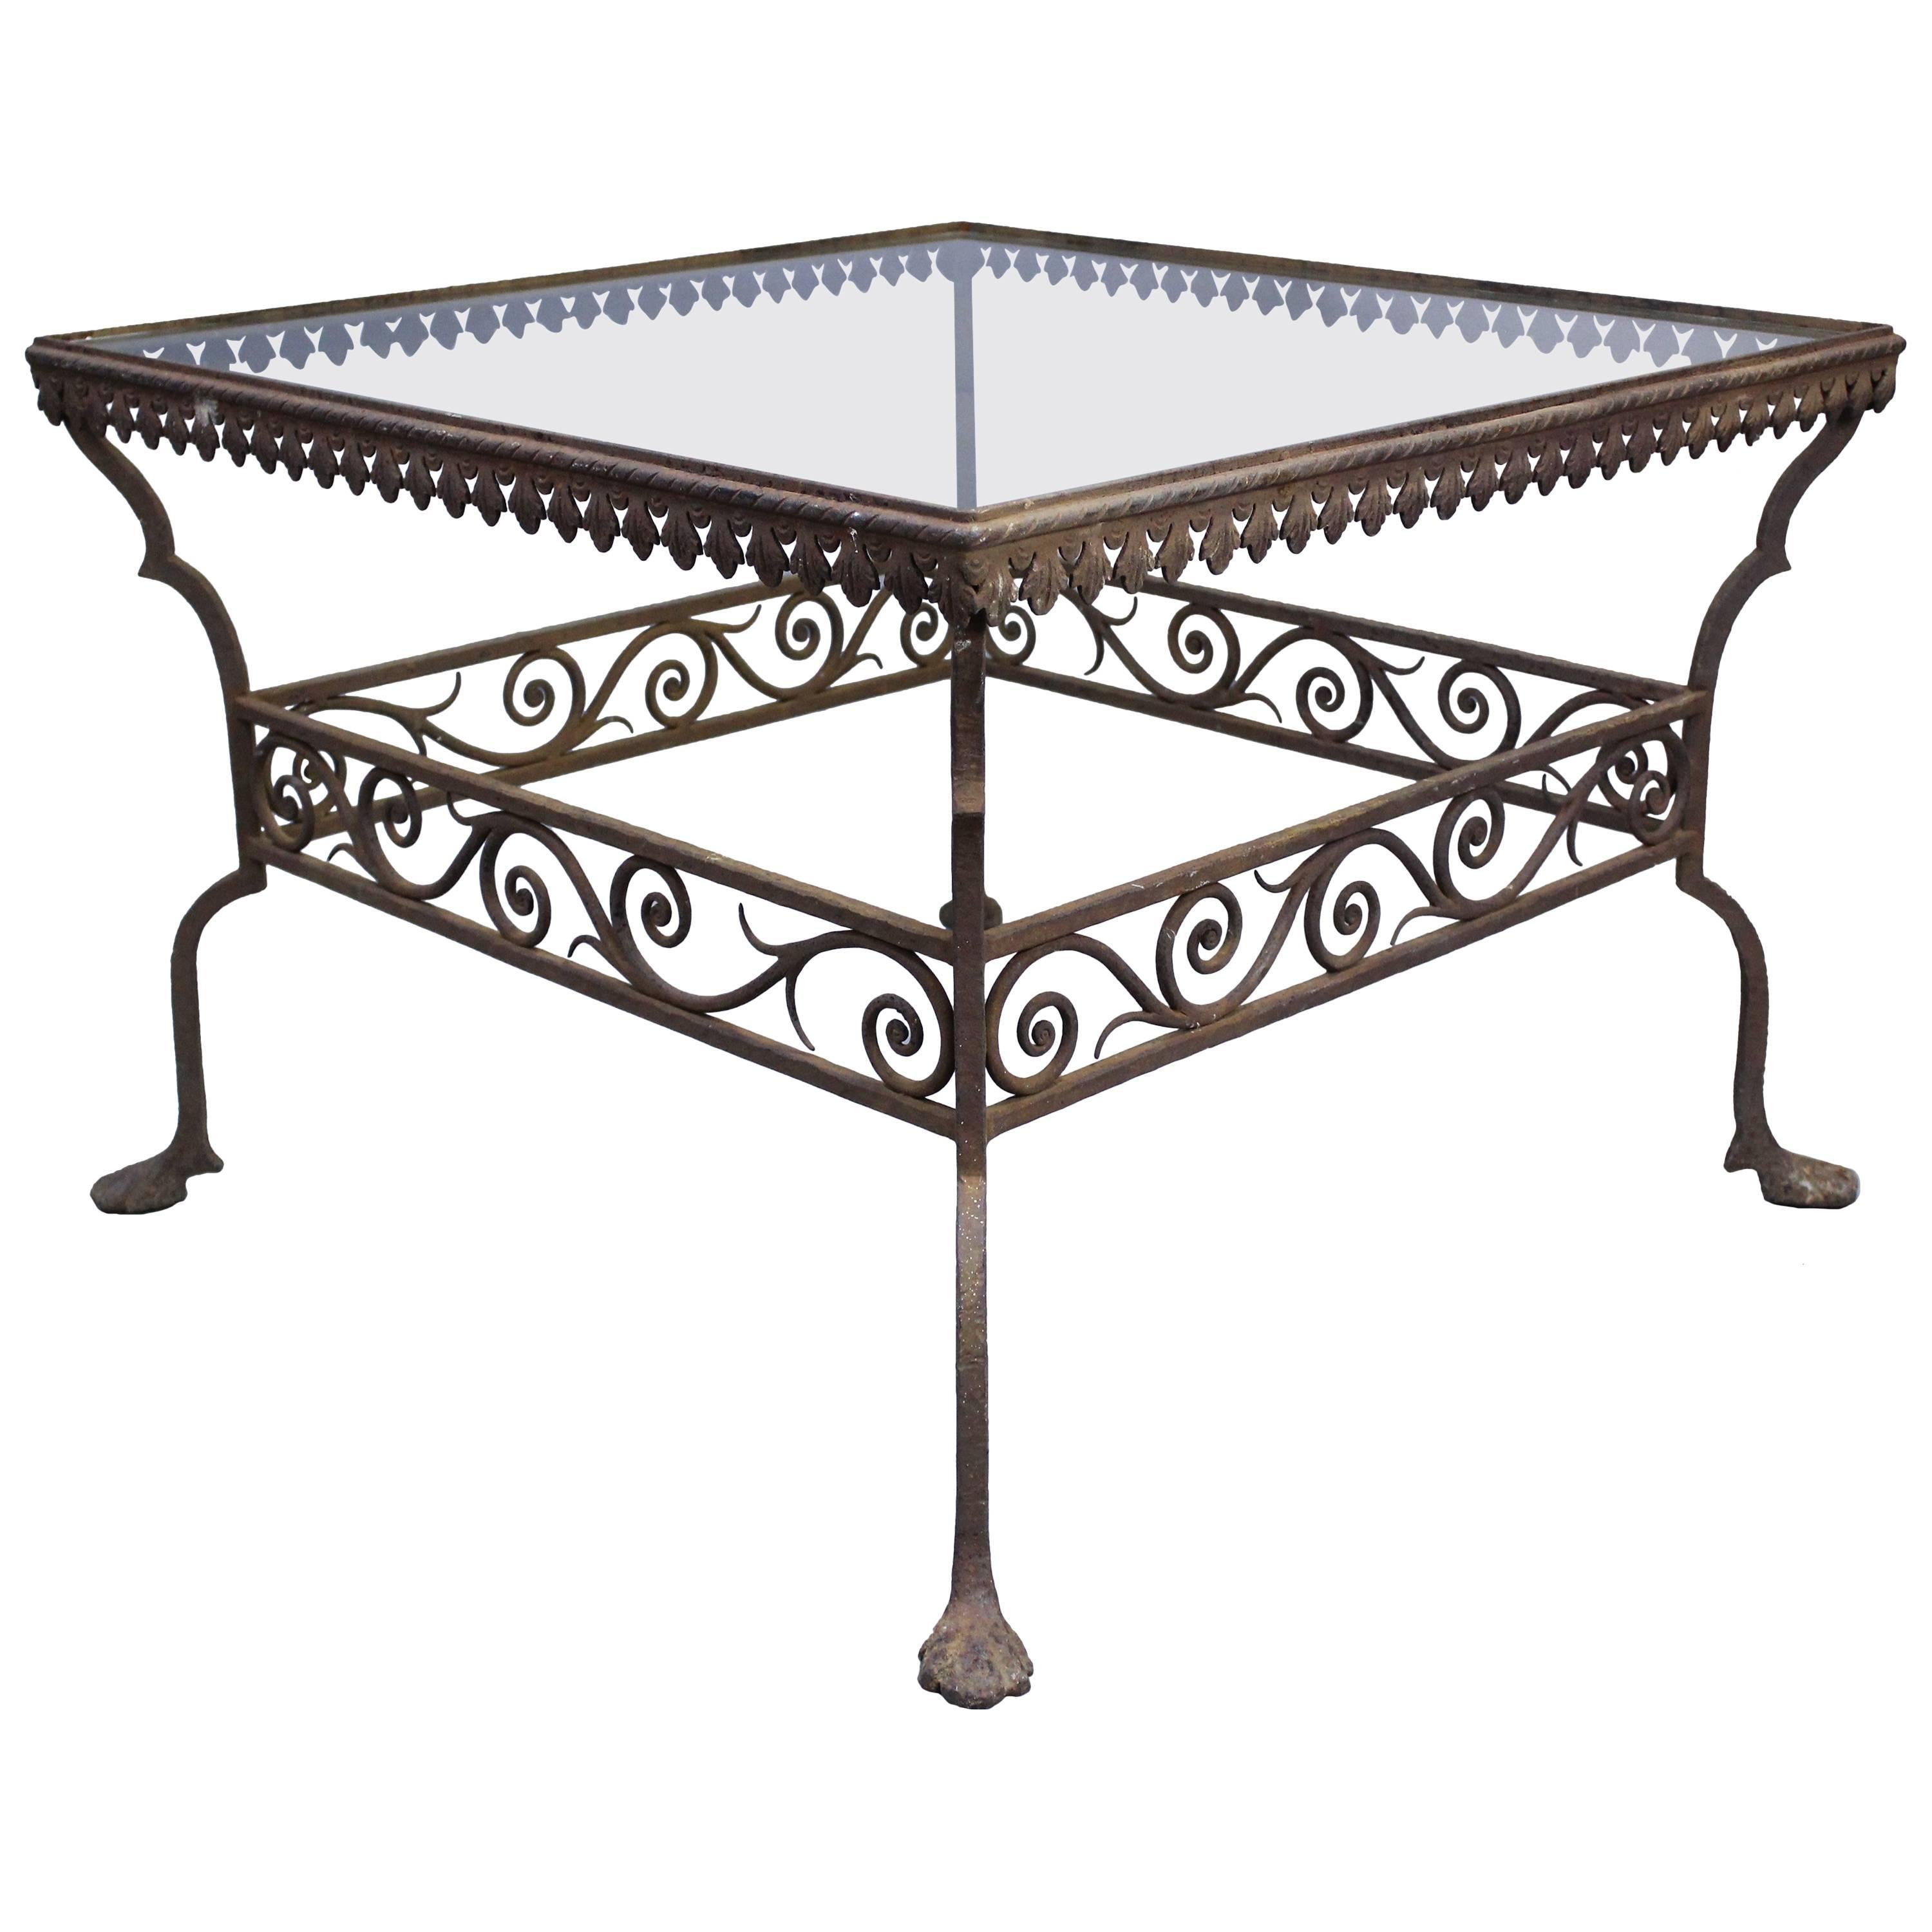 1920s Iron Coffee Table with Beautiful Scroll Details